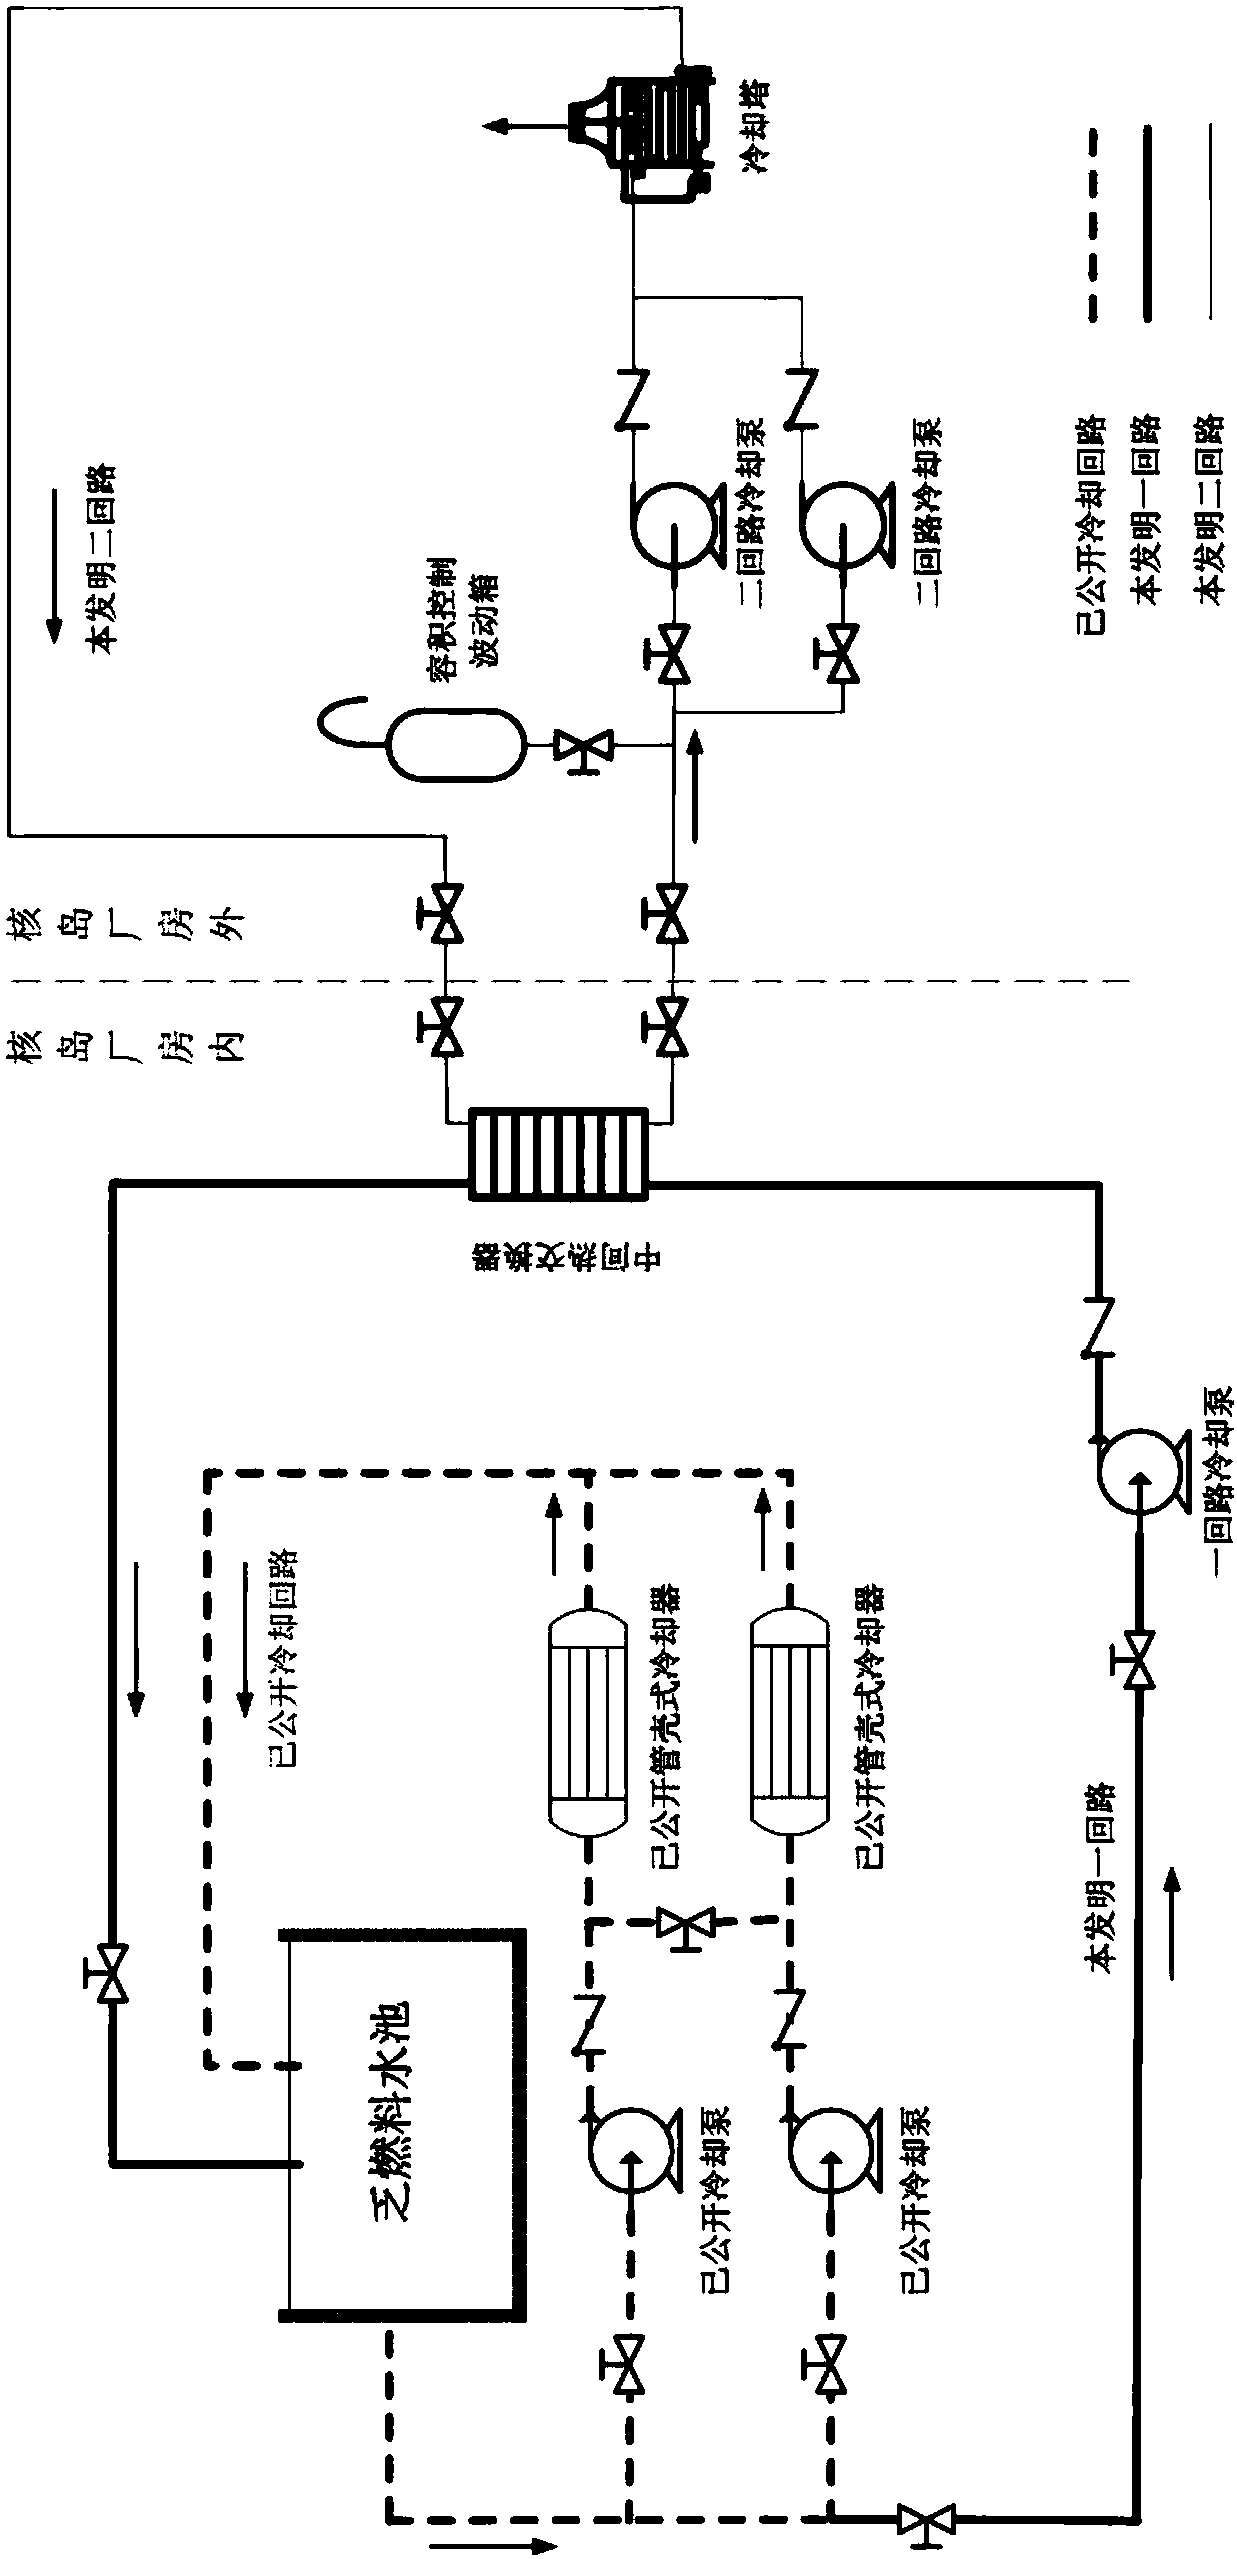 Supplementary cooling device for spent fuel pool of nuclear power plant